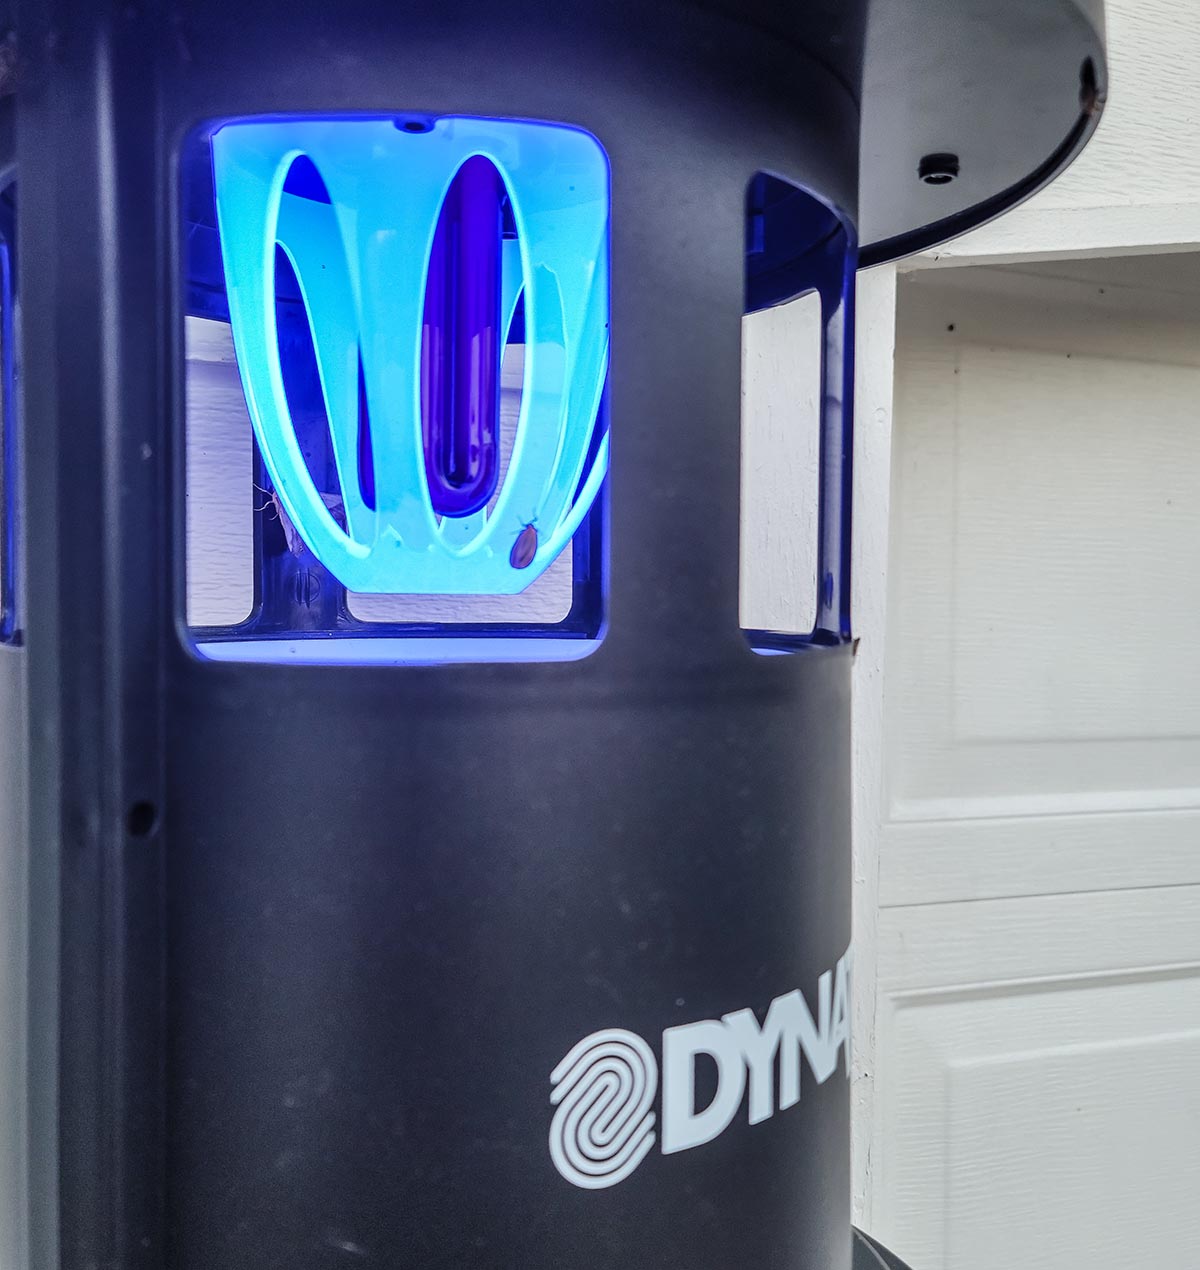 A close-up of the UV light in the DynaTrap insect trap